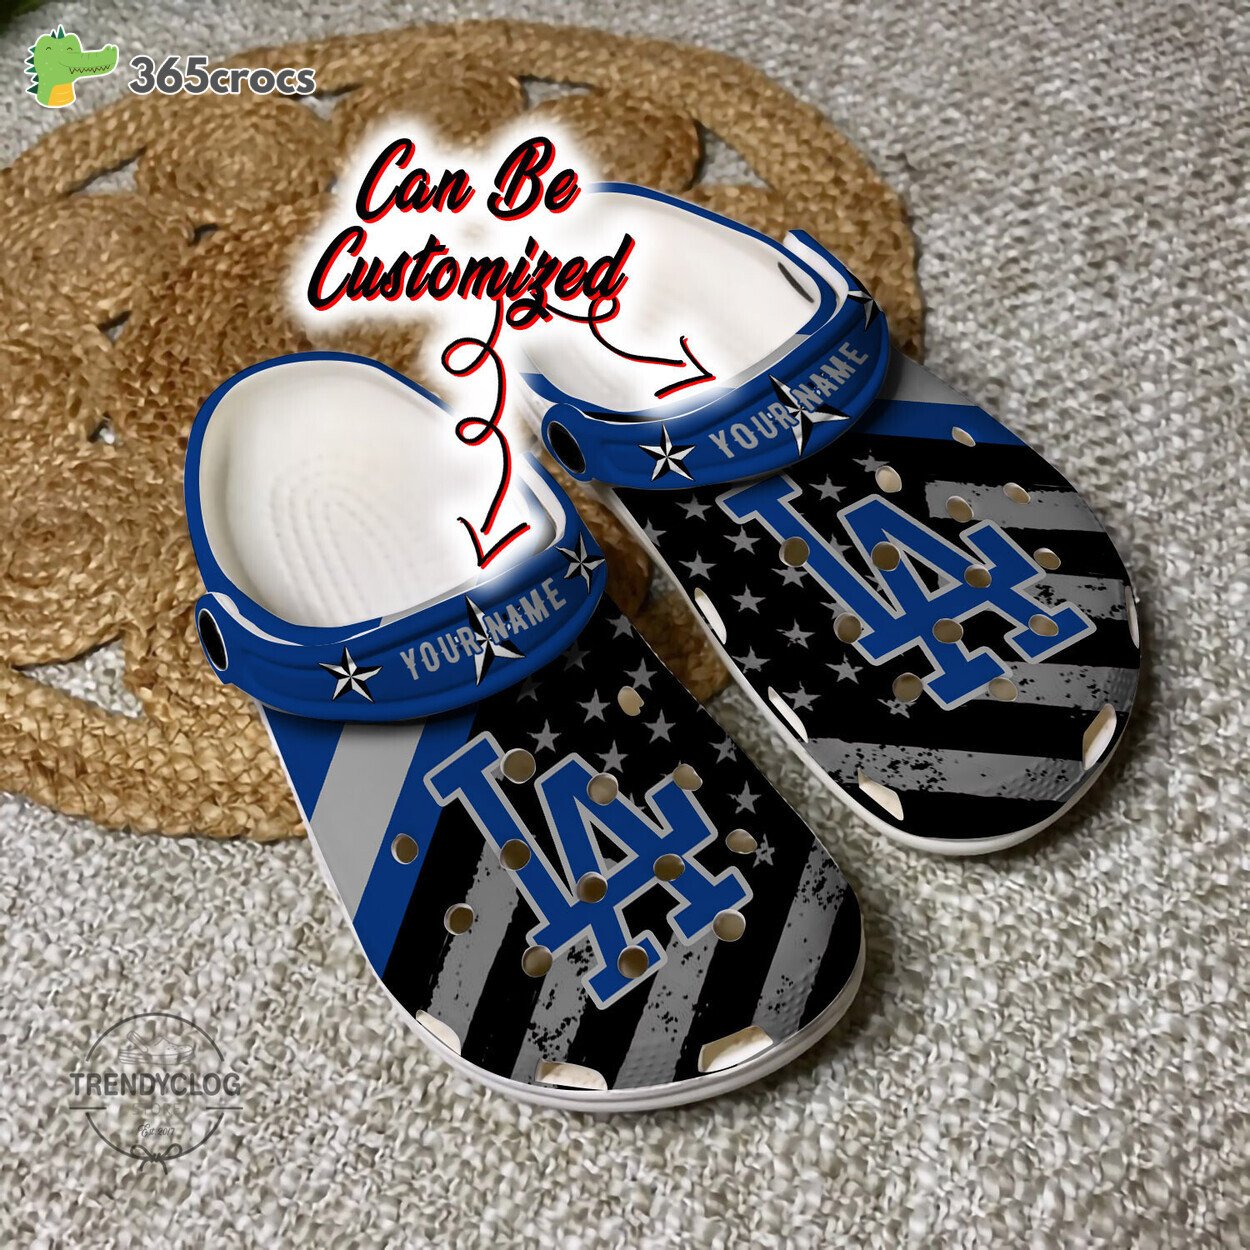 Los Angeles Dodgers Baseball Personalized Clogs Hit the Fashion Home Run